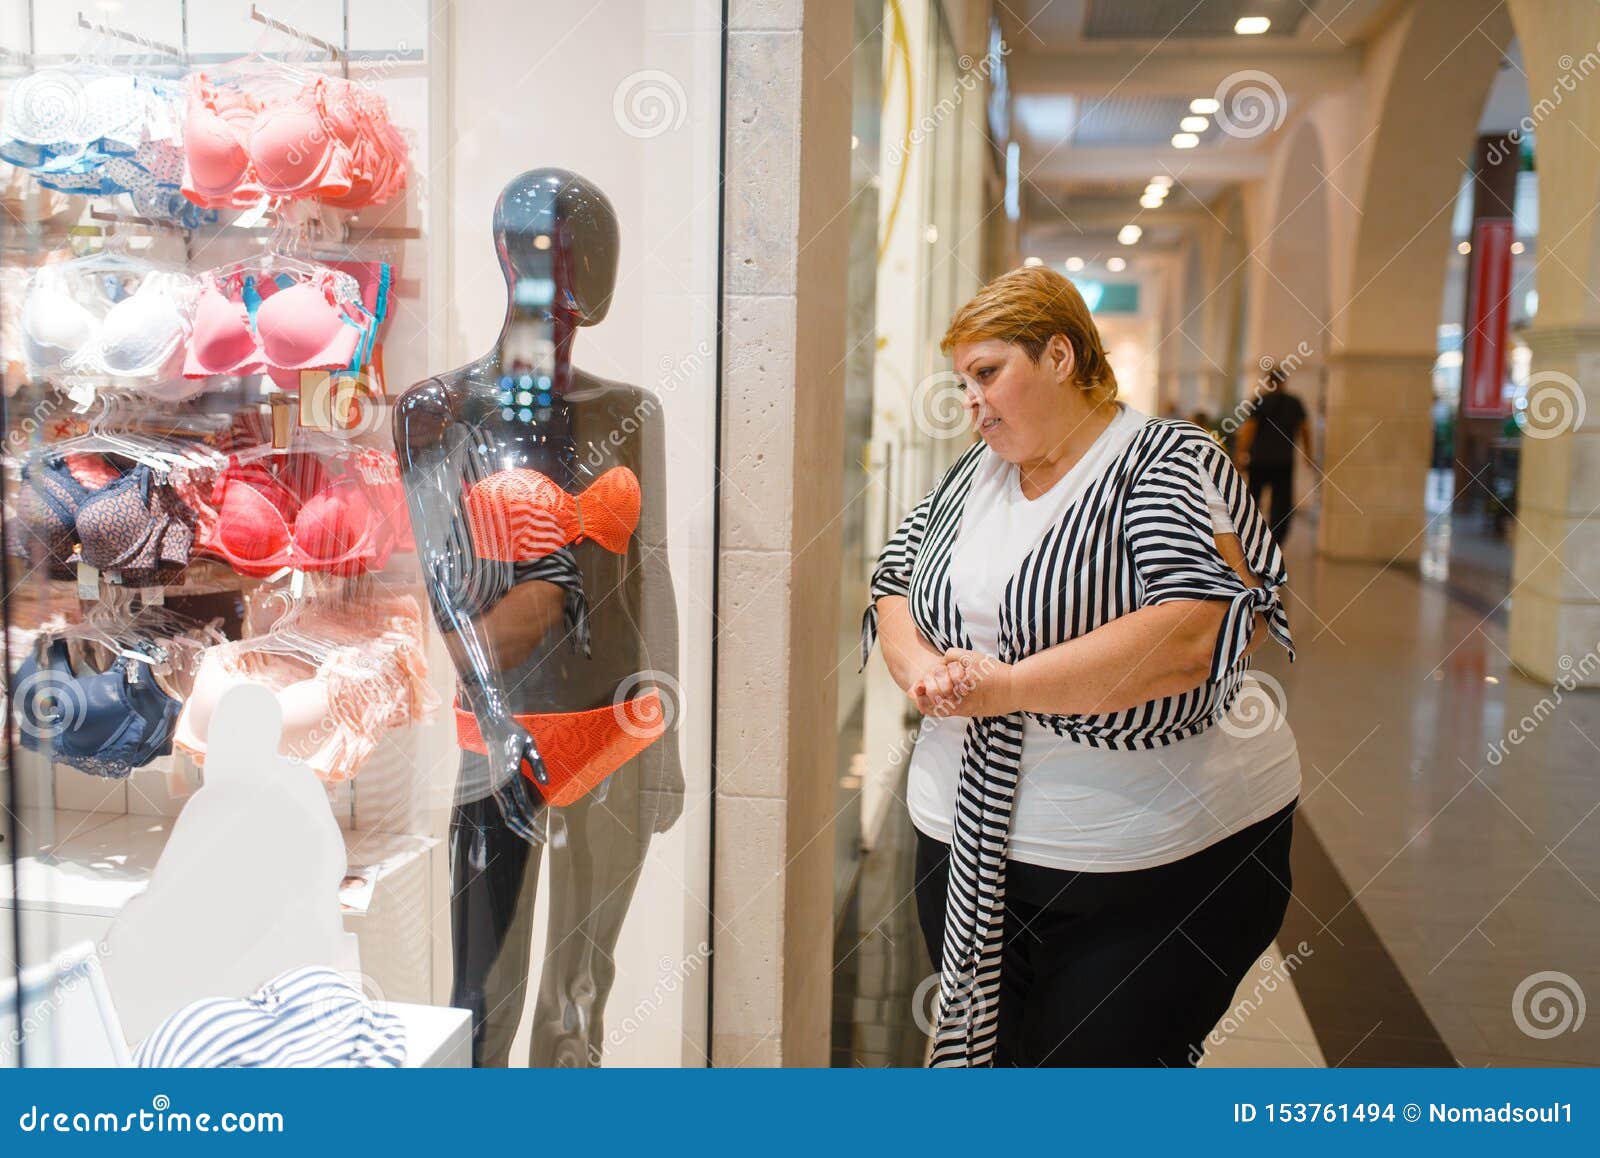 Fat Woman Near the Showcase with Underwear Stock Photo - Image of